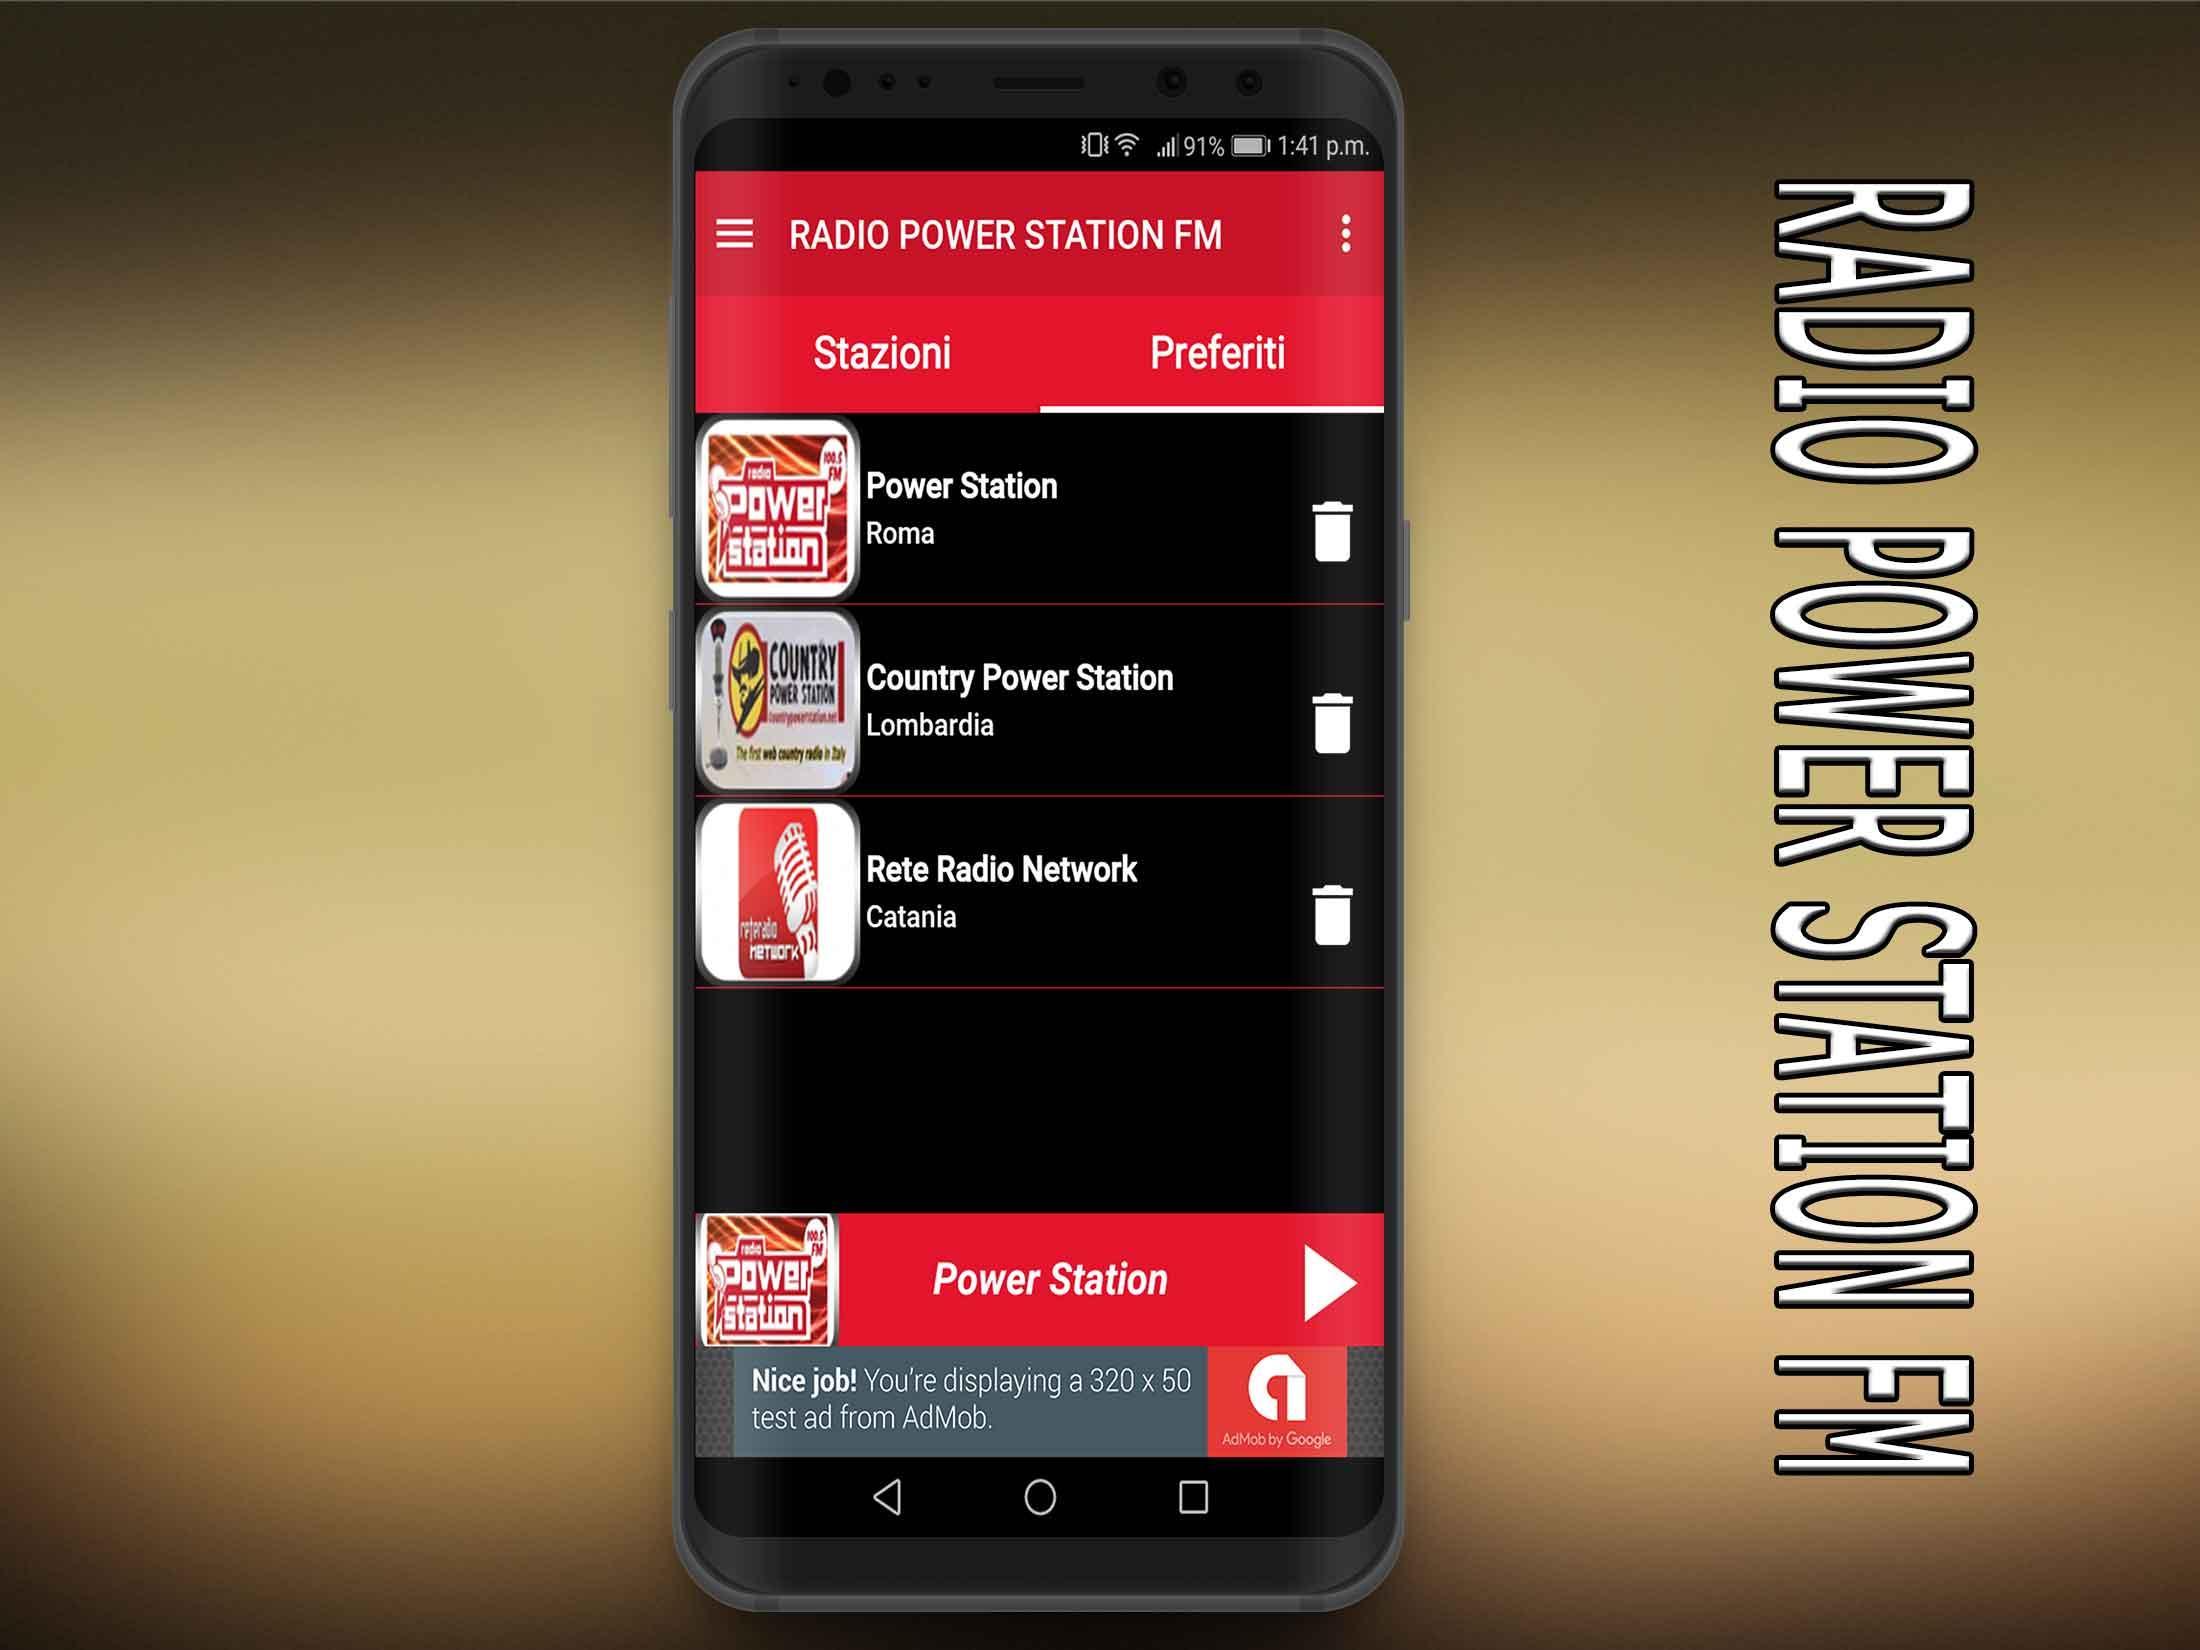 power station:radio power station fm diretta app for Android - APK Download